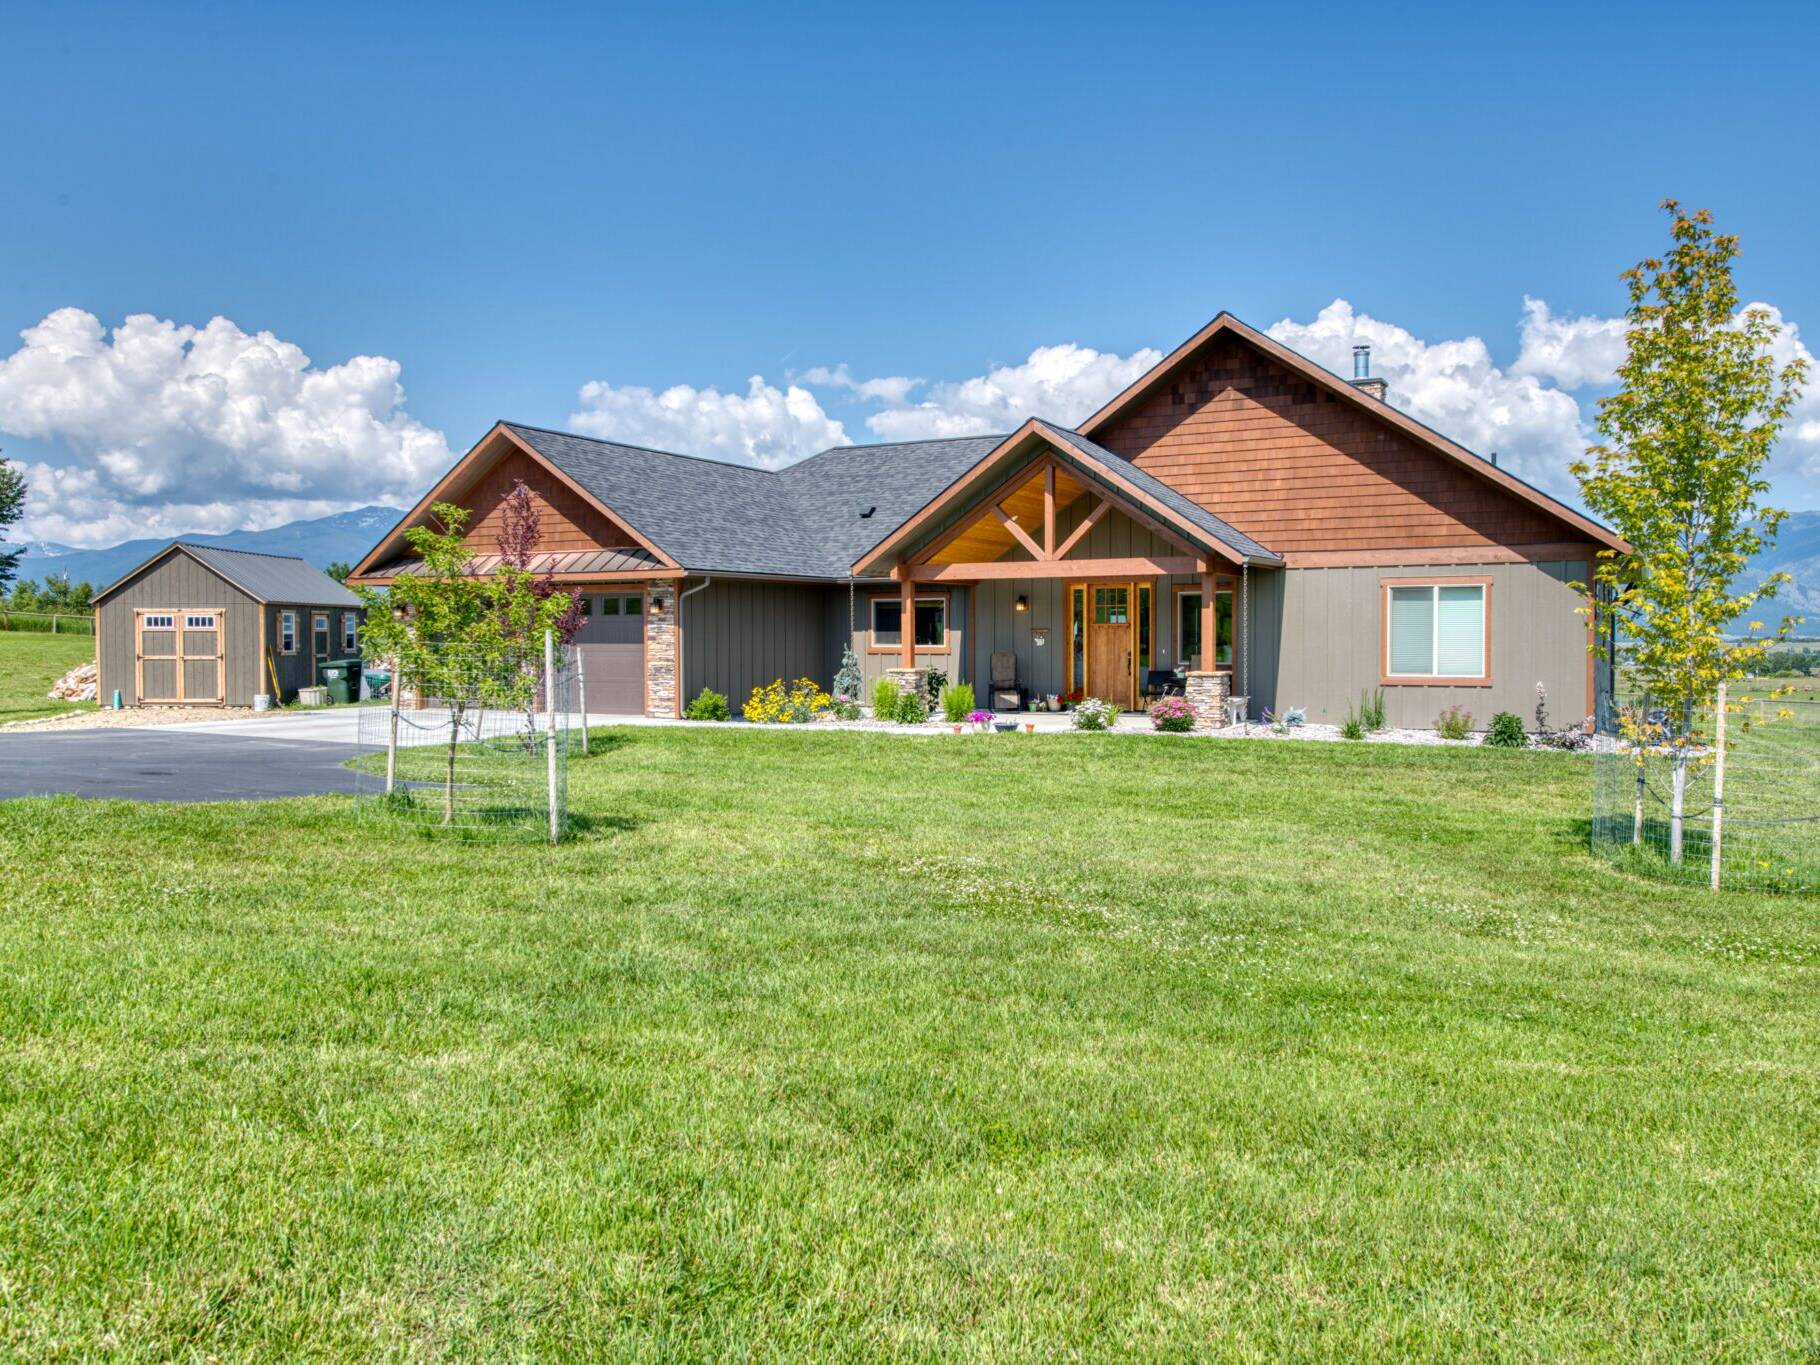 Front exterior, featuring a timber truss at the entry and a copper roof accent over the garage on a custom home built by Big Sky Builders in Stevensville, MT